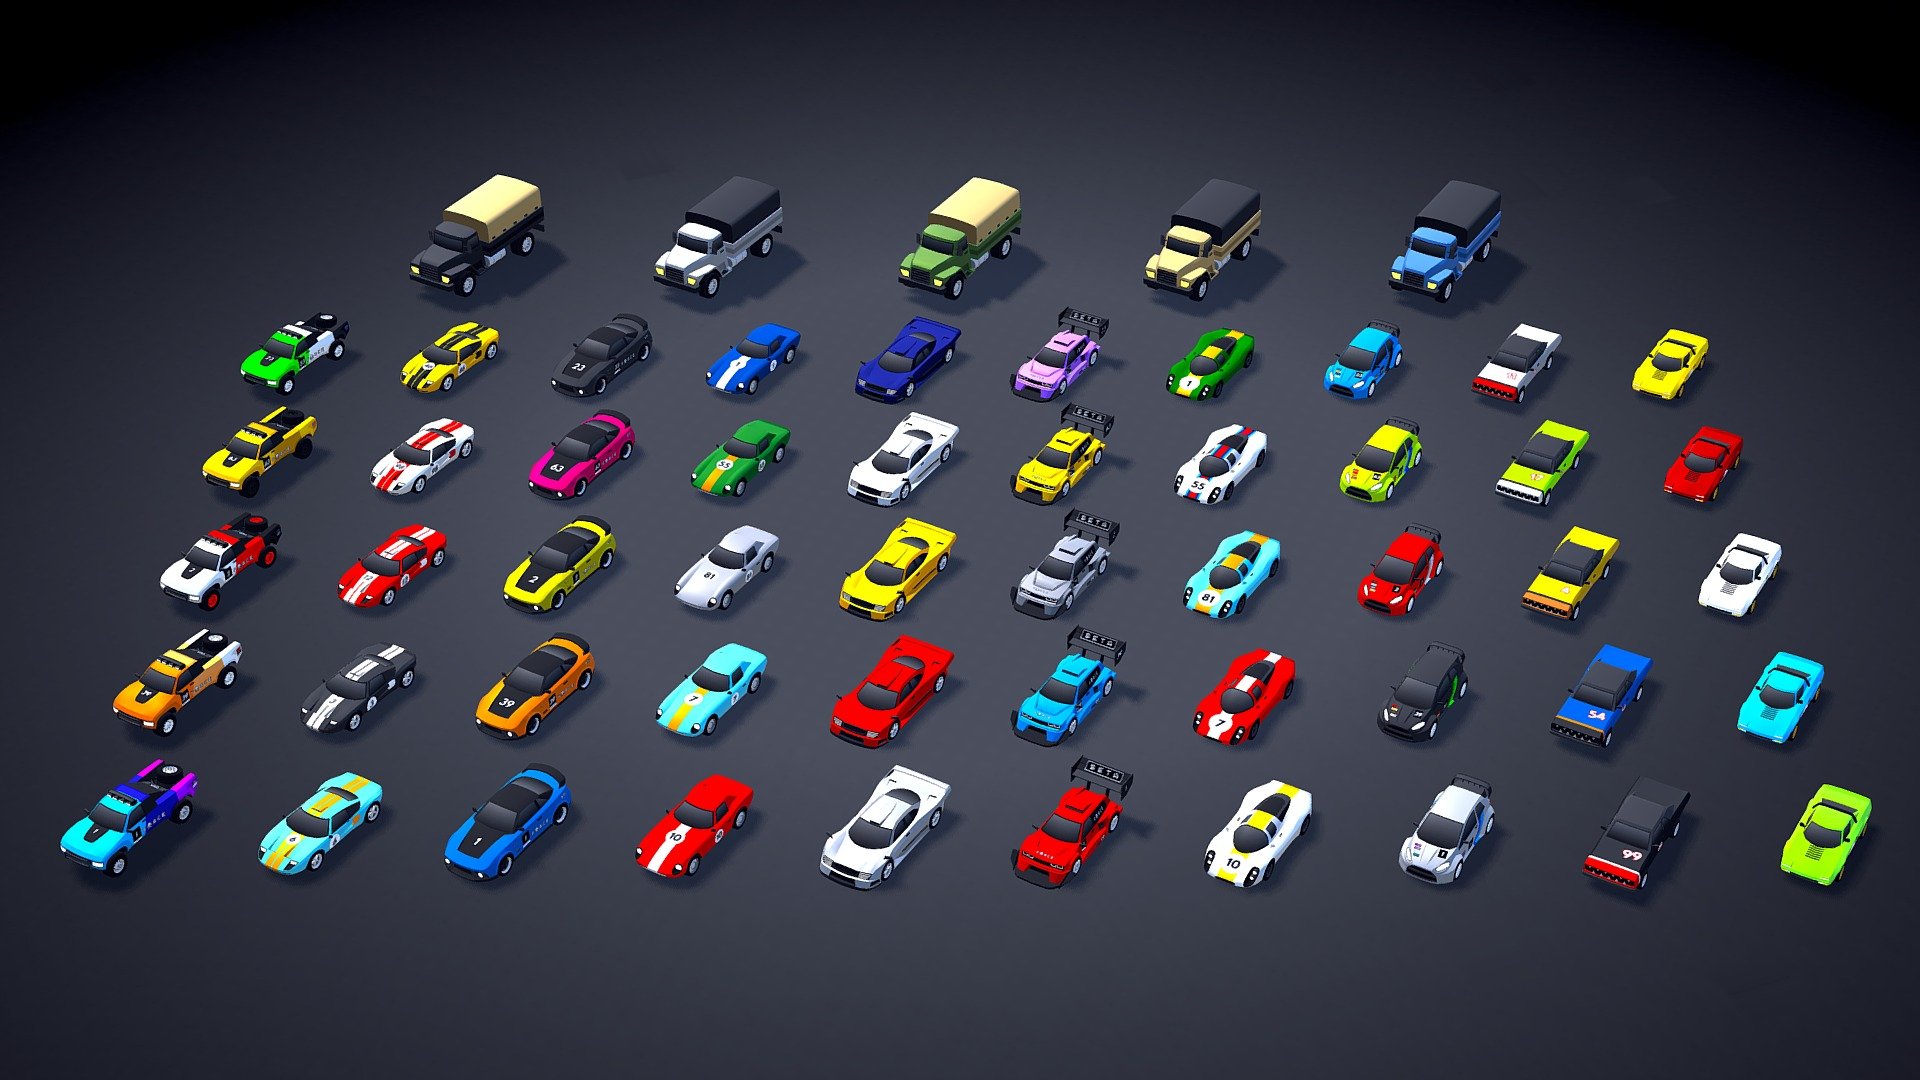 This is the (free) August update of my asset called ARCADE: Ultimate Vehicles Pack. This update will be launched on August 4th. Available in Unity3D (in the Unity Asset Store) and Sketchfab! (FBX + UNITY Files included).

The update includes 3 new vehicles (racing cars and military trucks). Moreover, I updated 8 racing cars with vinyl and decals. During the following months I will be updating all racing cars with these visual enhancements. Zoom-in and check it!

Best regards, Mena 3d model